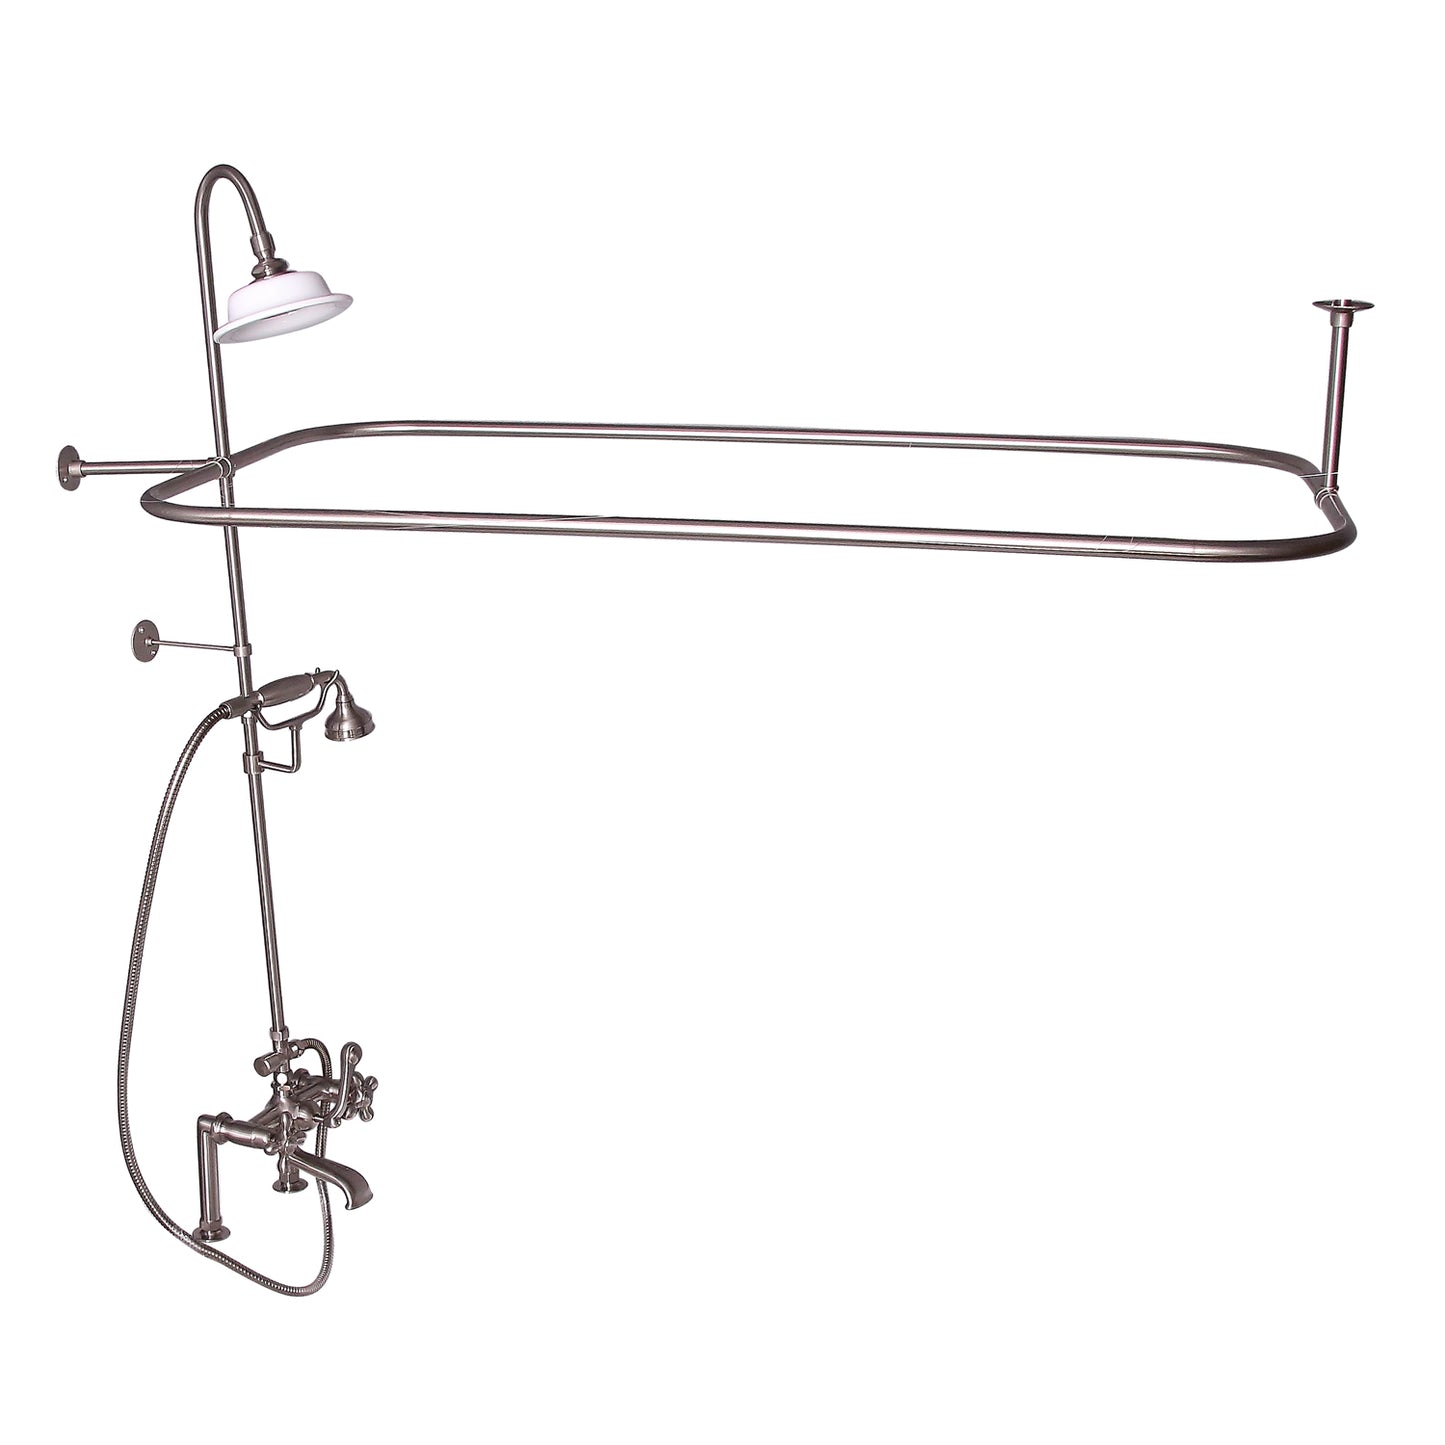 Complete Faucet & Shower Kit for Freestanding Tub 48" x 24" Rod, Cross Handle, Brushed Nickel